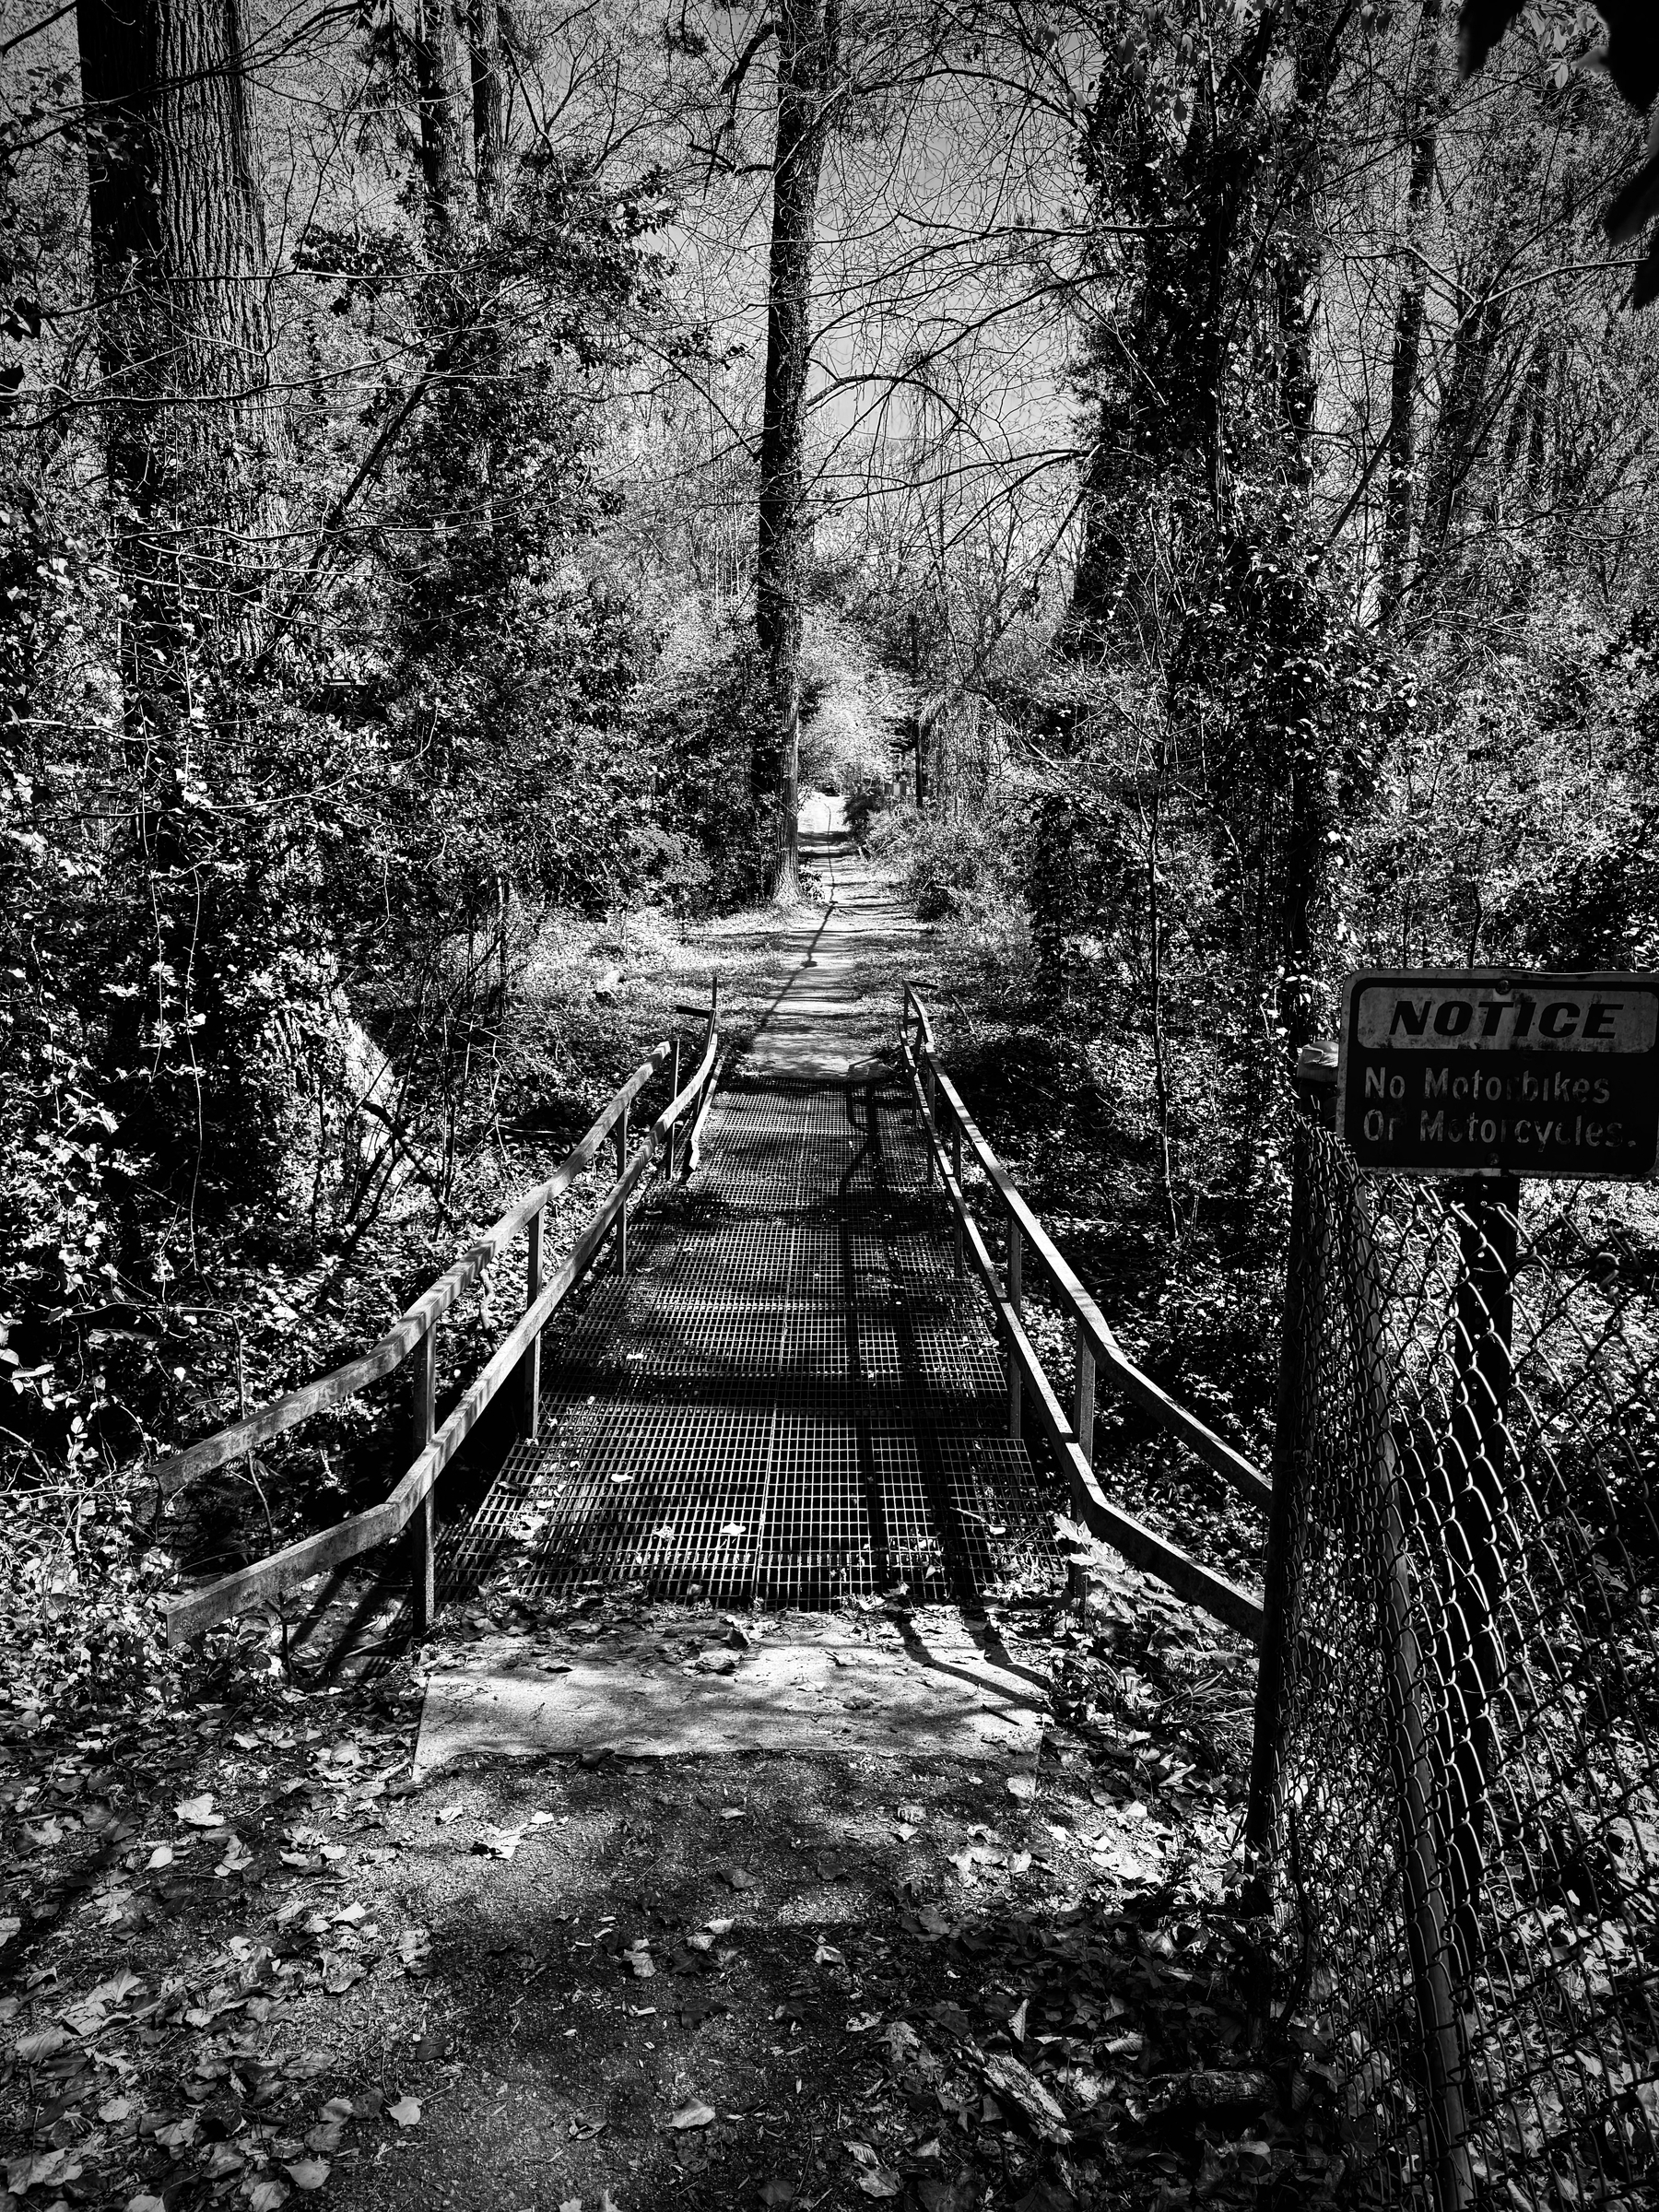 A black and white photo of a narrow steel footbridge in a wooded area with a sign stating “NOTICE No Moto bikes Or Motorcycles.” Leaf-covered ground borders the path leading to the bridge.